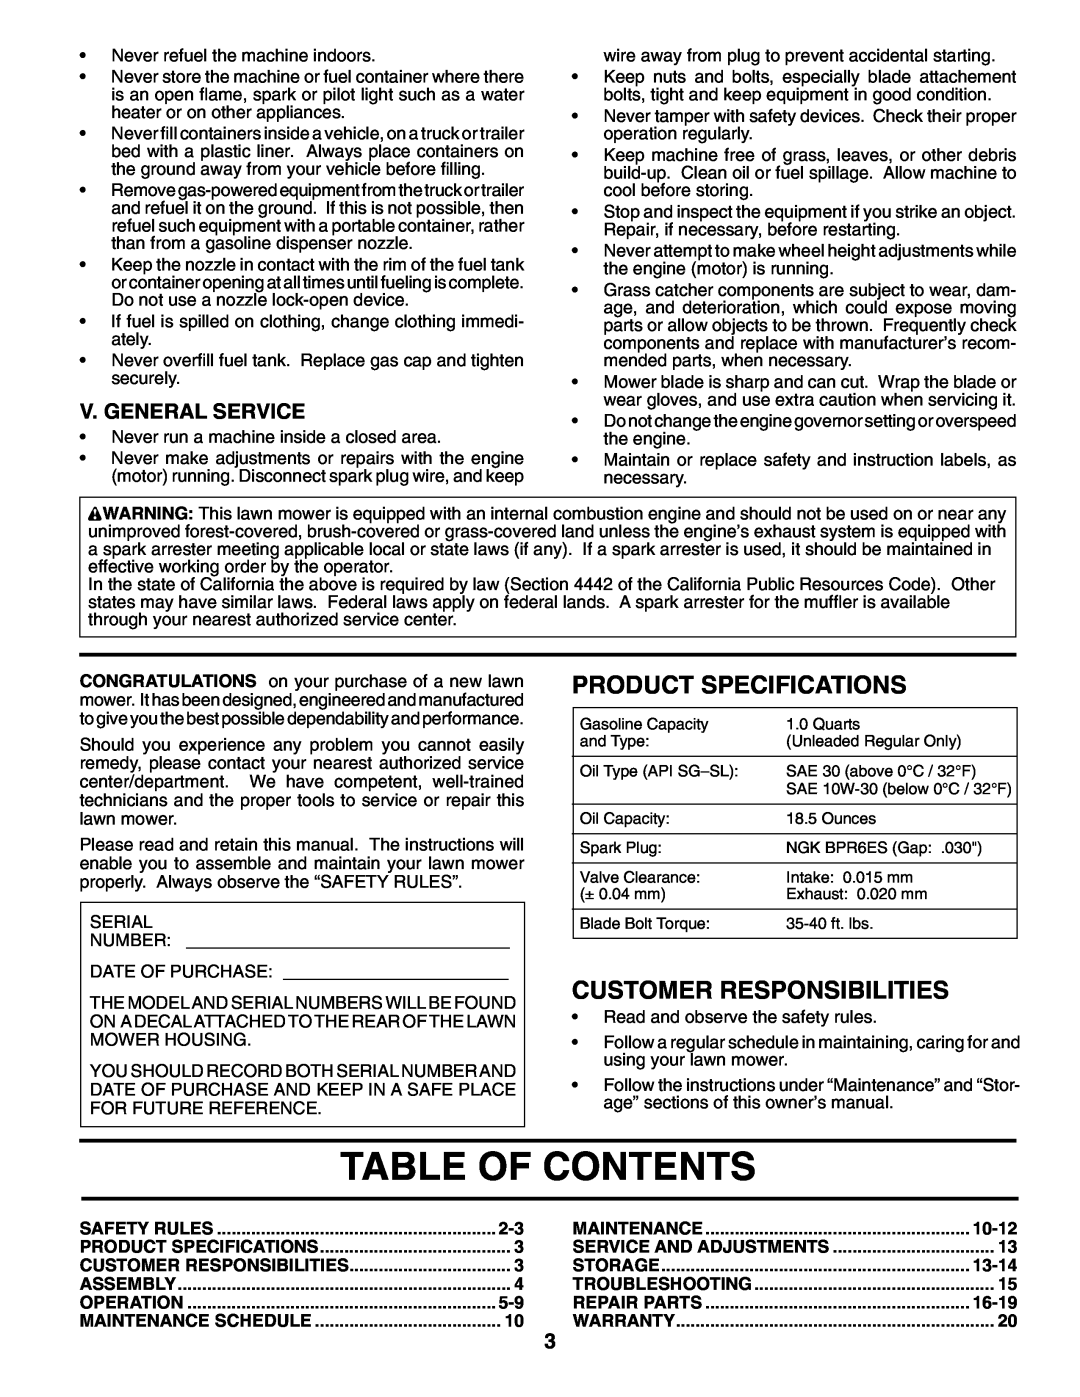 Husqvarna 5521BBC Table Of Contents, Product Specifications, Customer Responsibilities, V. General Service, 10-12, 13-14 